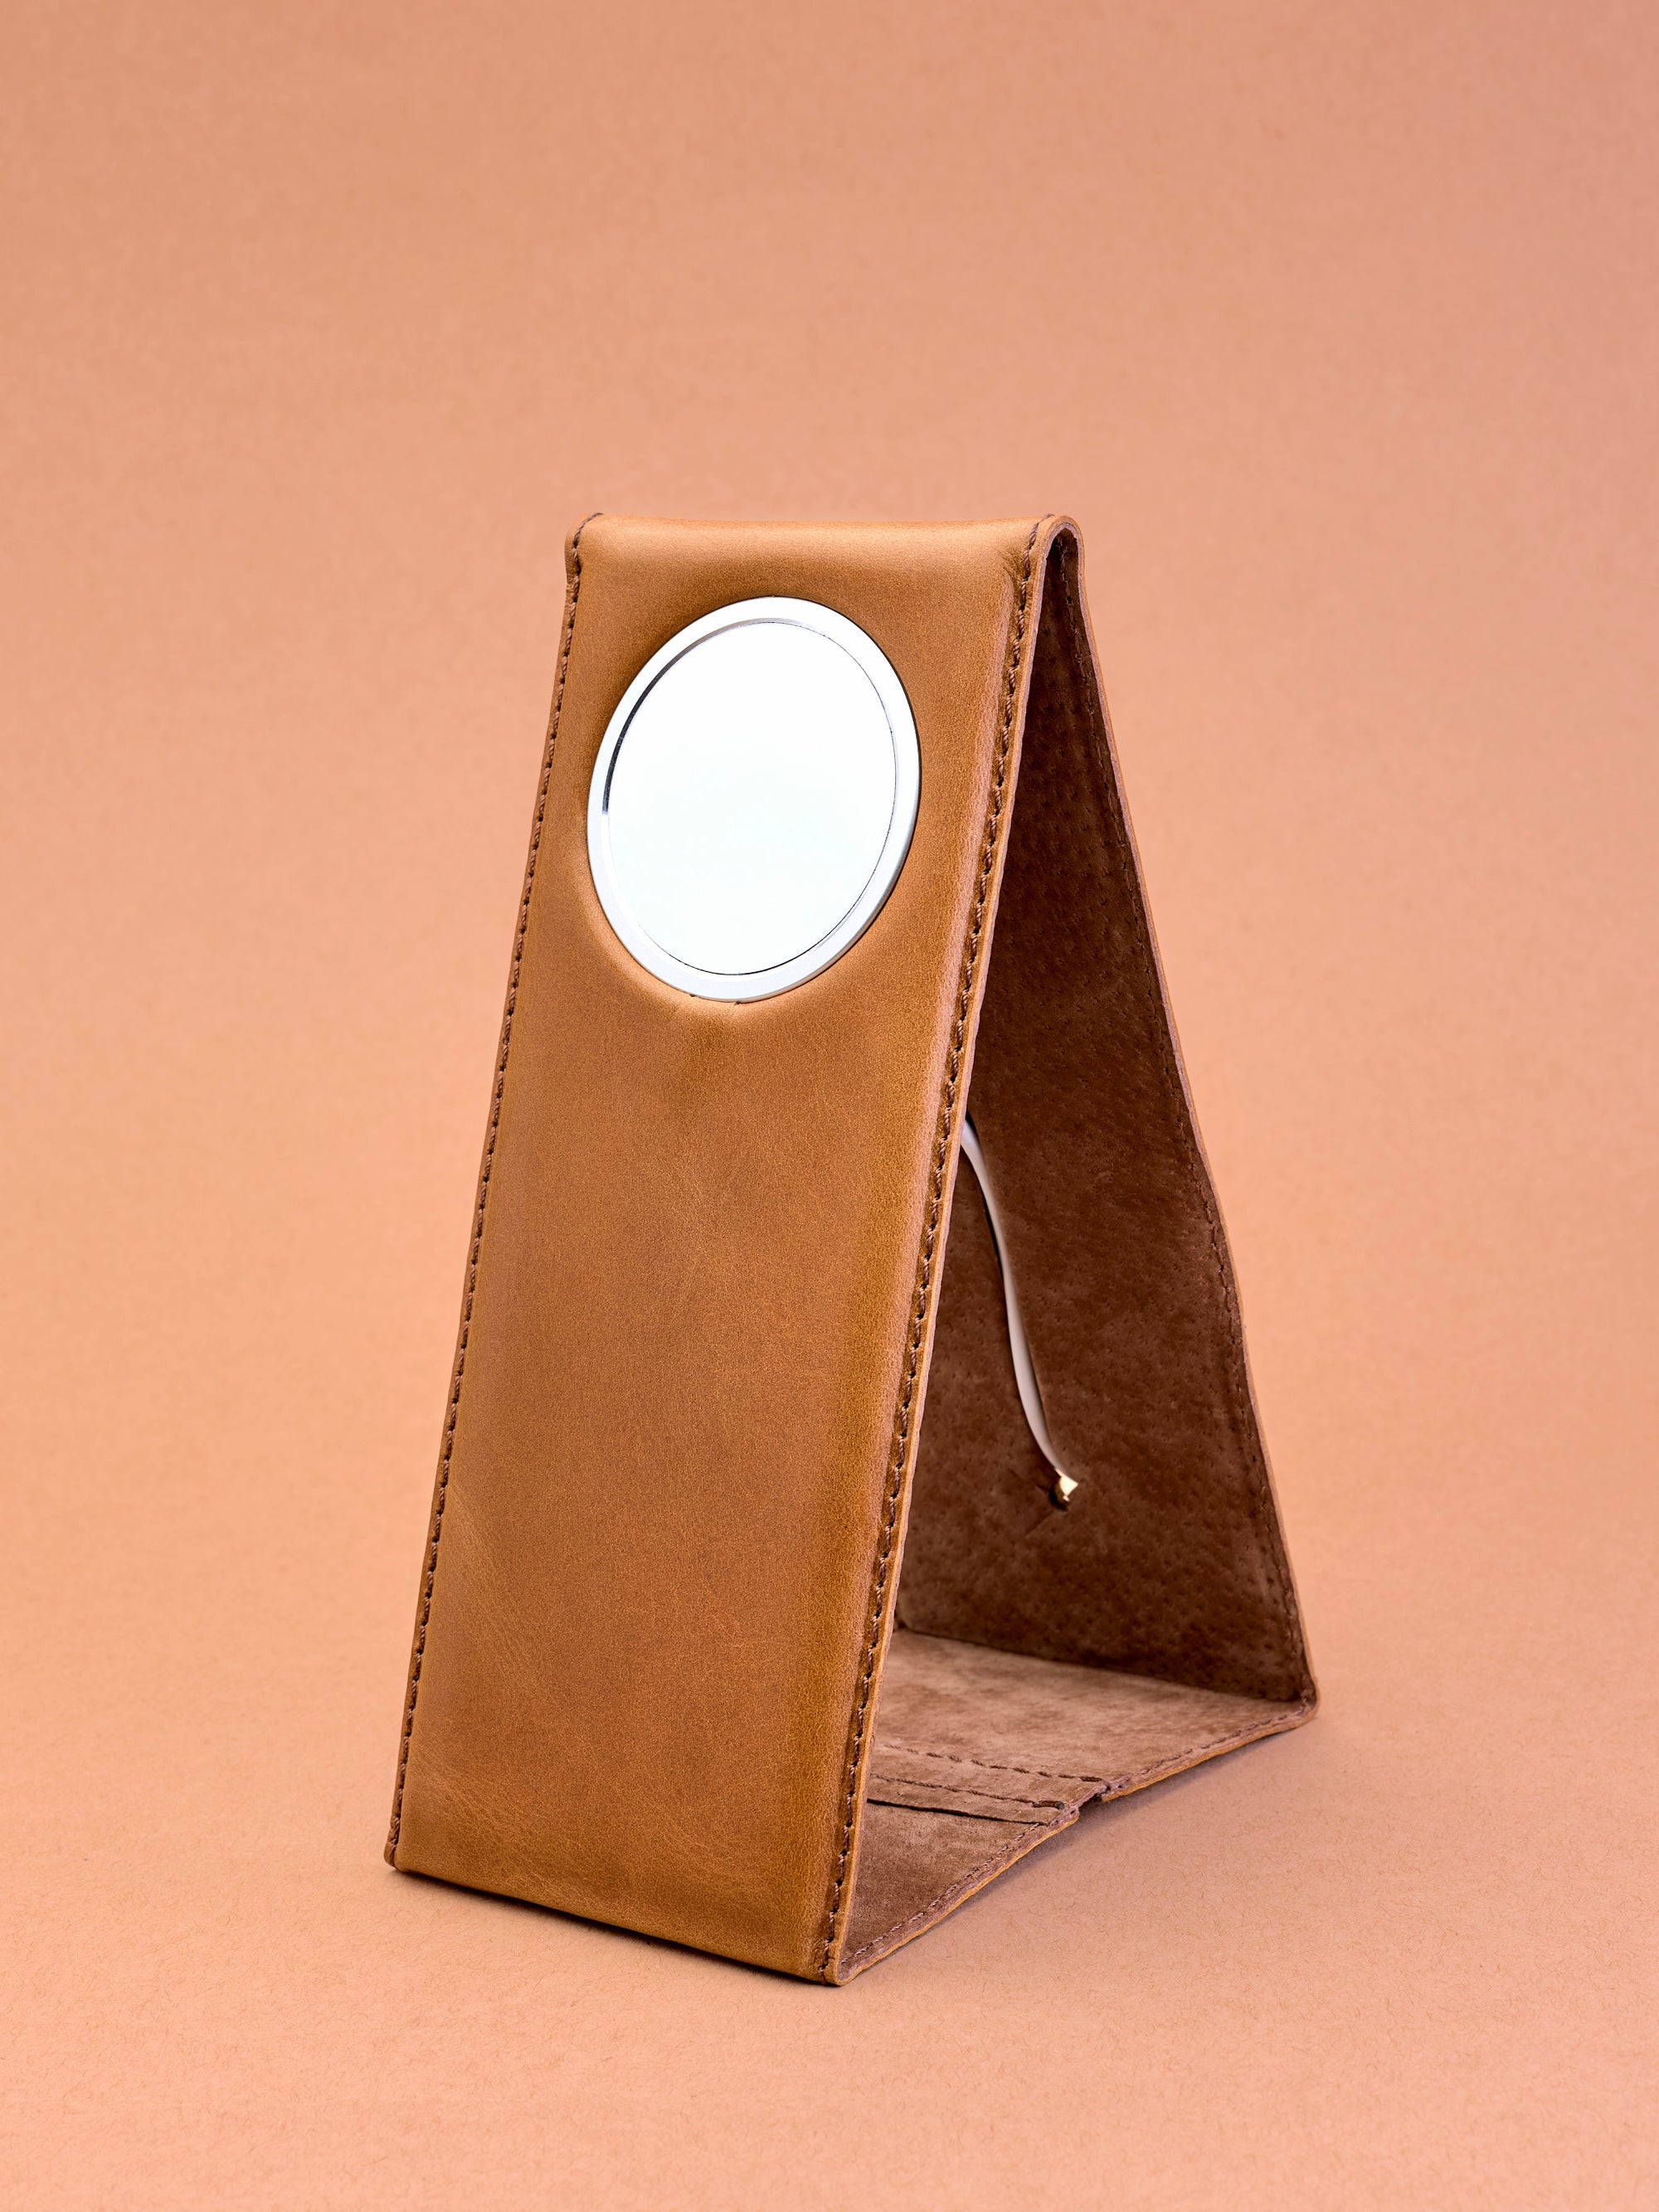 iPhone accessory. MagSafe iPhone Holder Stand Tan by Capra Leather